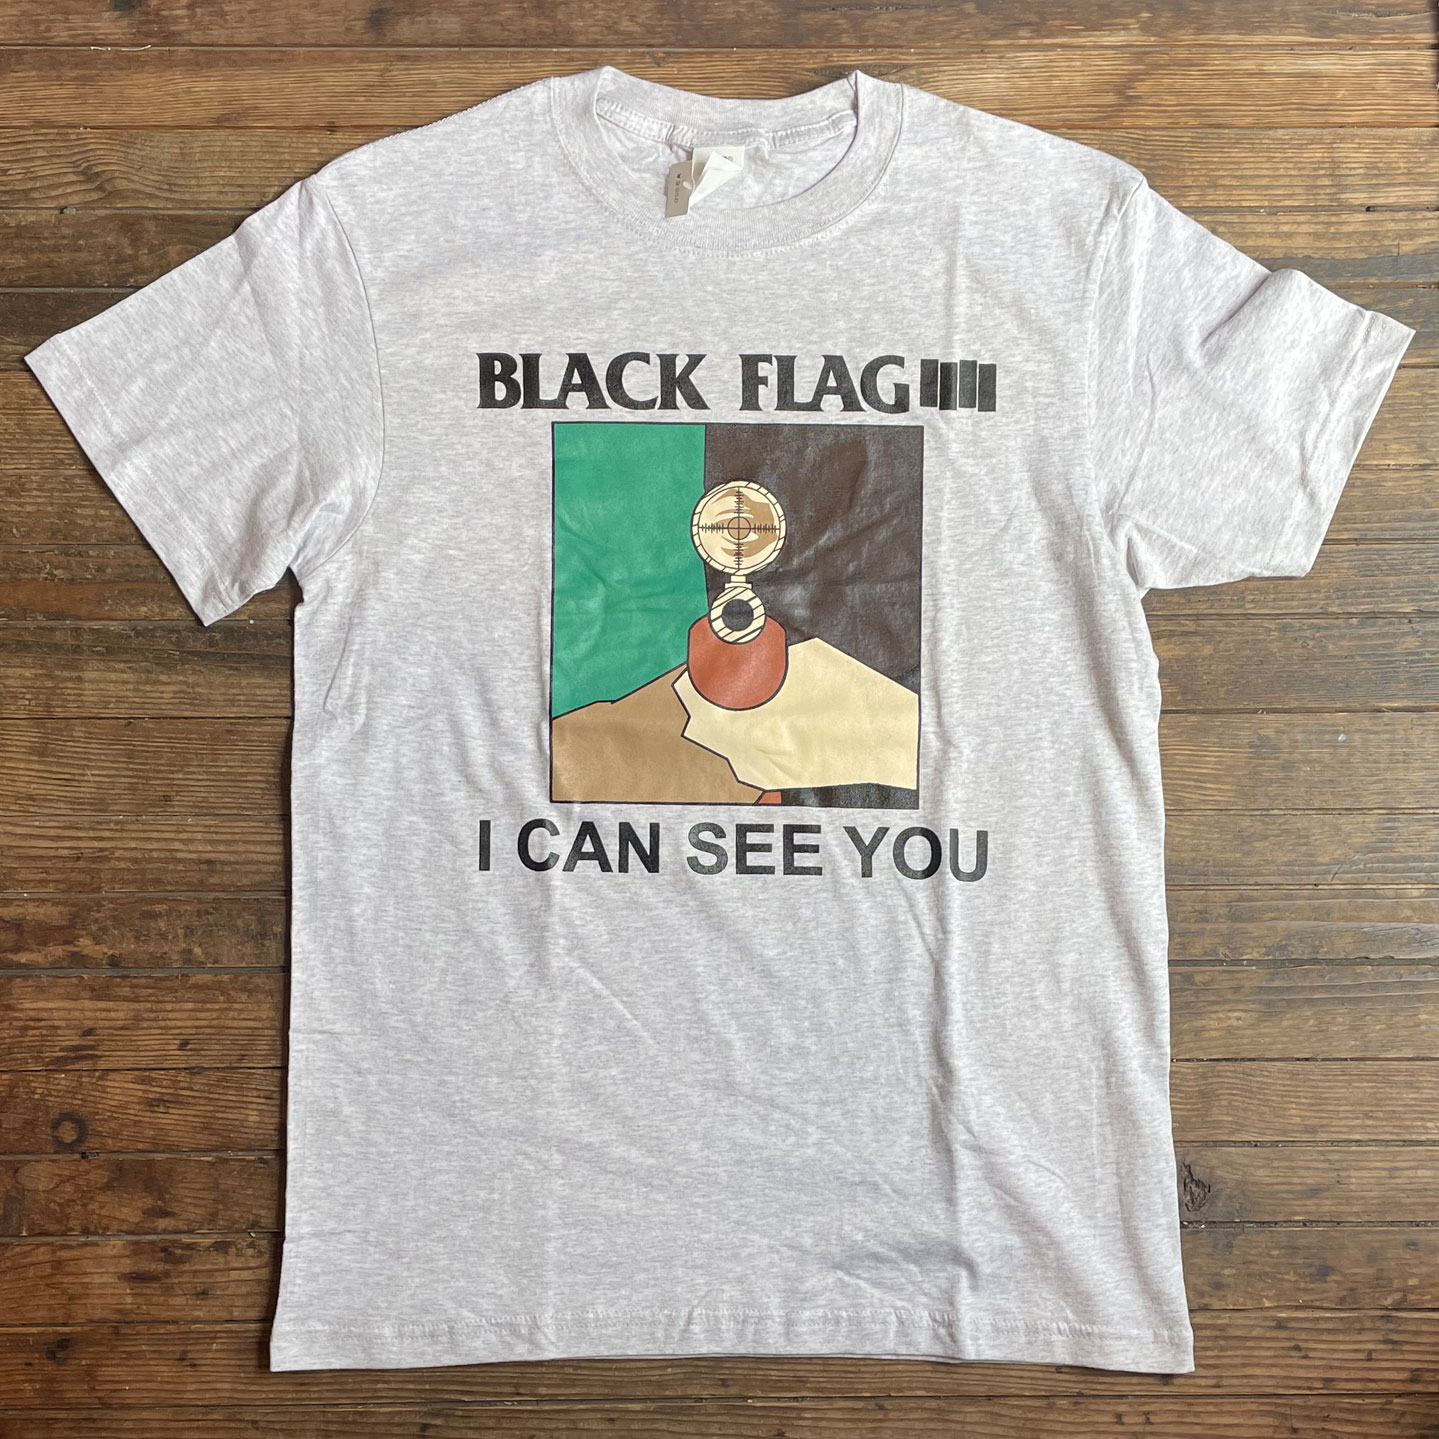 BLACK FLAG Tシャツ I CAN SEE YOU